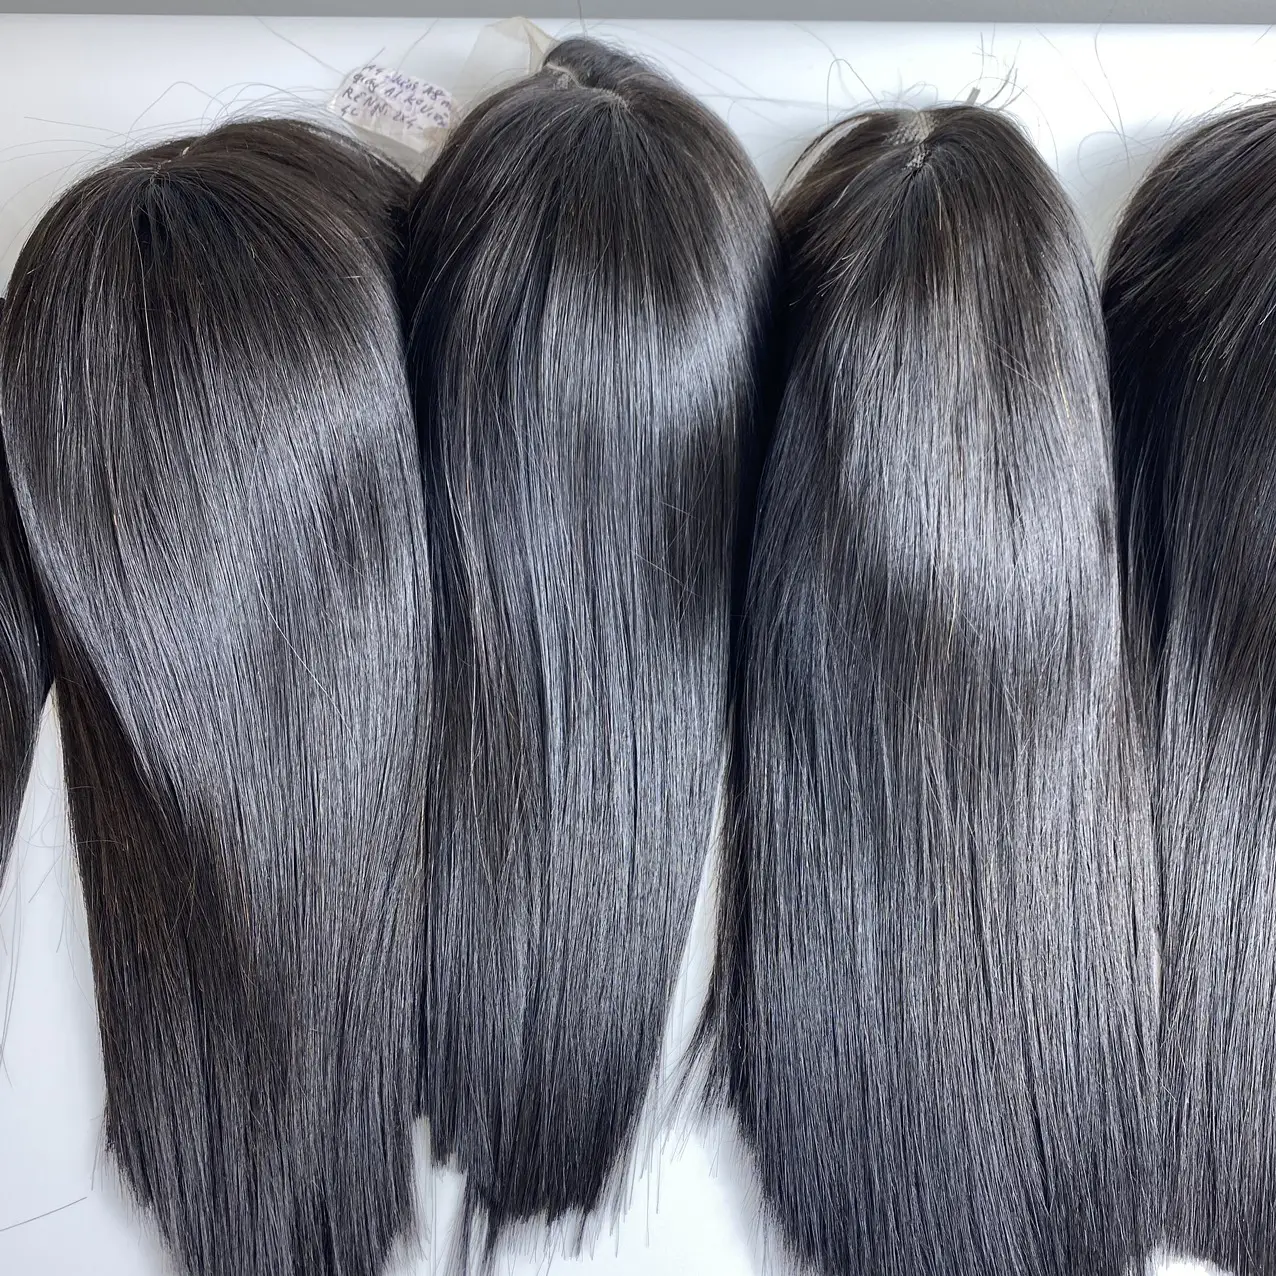 Best Products: Lace Front Wigs Human Hair Extensions Vietnamese Human Hair Brazilian For Women Manufacturer